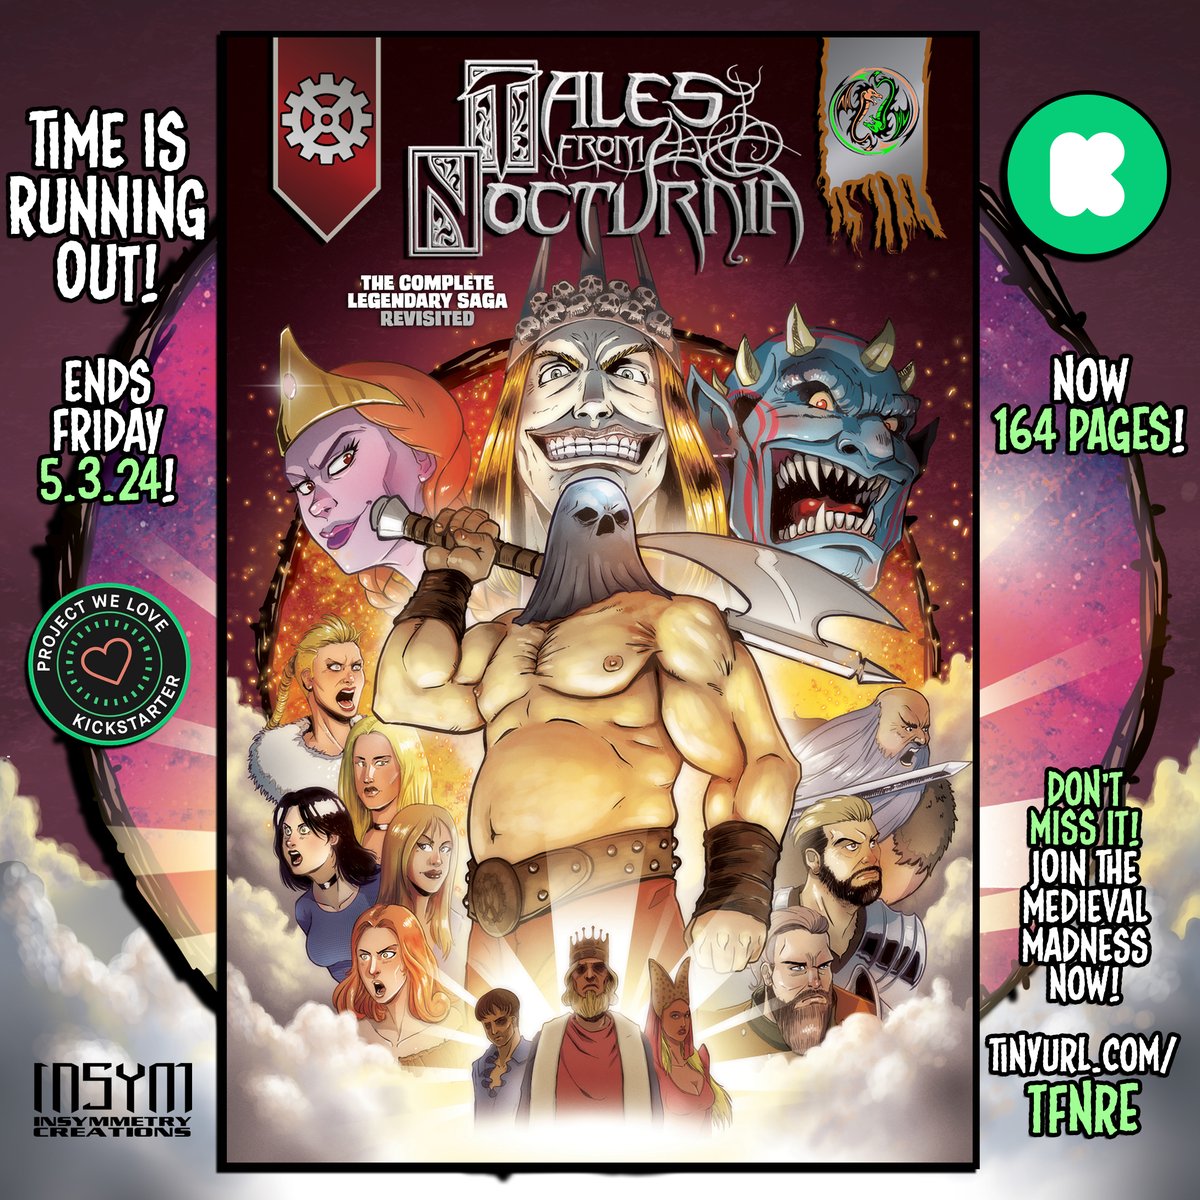 49 hours left and you all are pushing forward on @TFNocturnia on @KickstarterRead @Kickstarter - just $201 from the NEXT stretch goal. If we get there, we have ANOTHER ready to go, and another unlocked item! Come be MEDIEVALLY MAD with us! 

WE NEED YOU: tinyurl.com/tfnRE